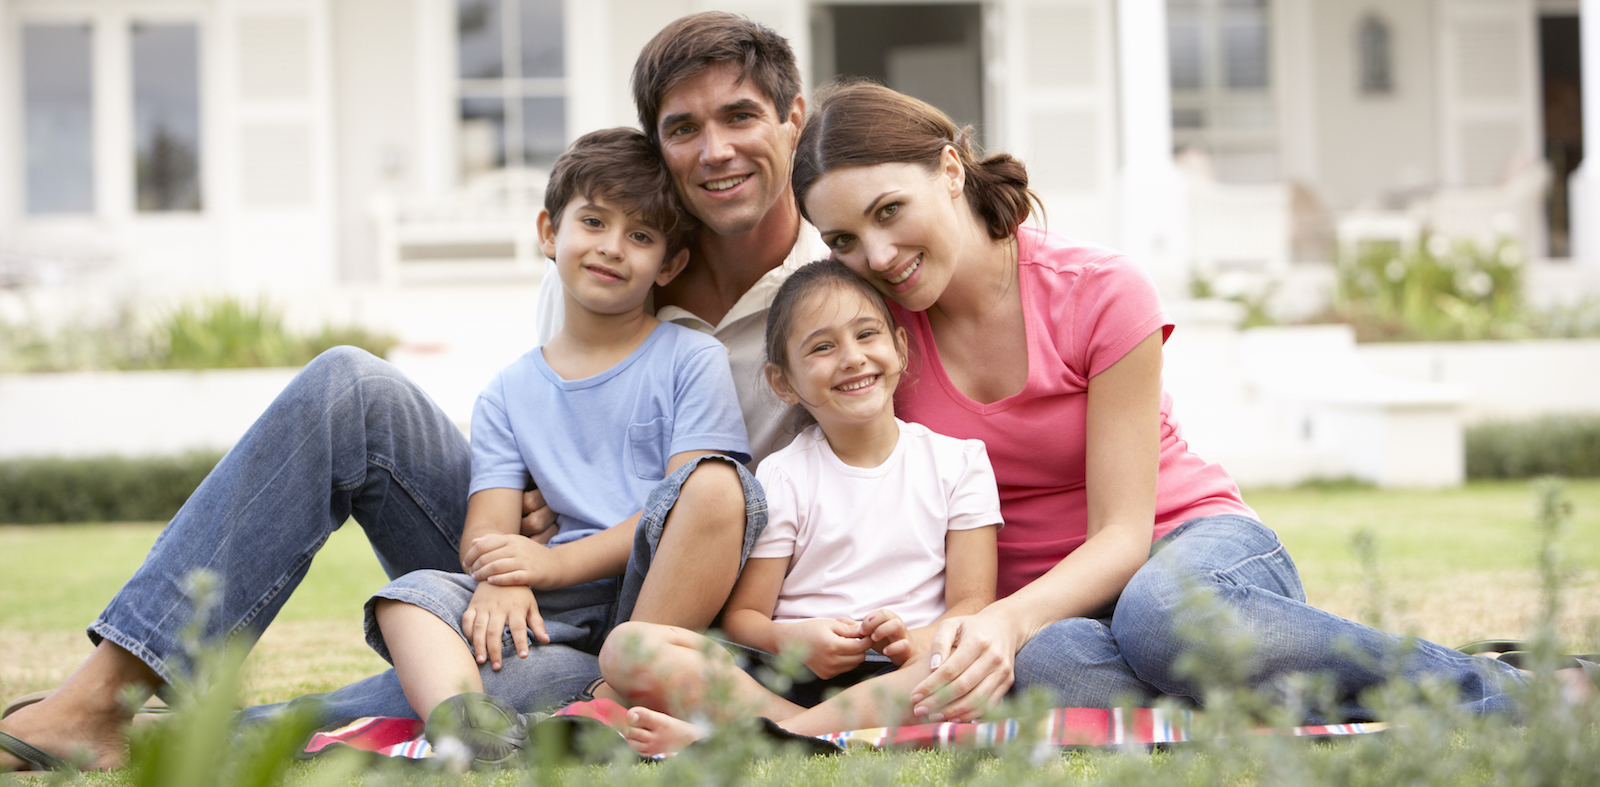 Family Sitting Outside House On Lawn